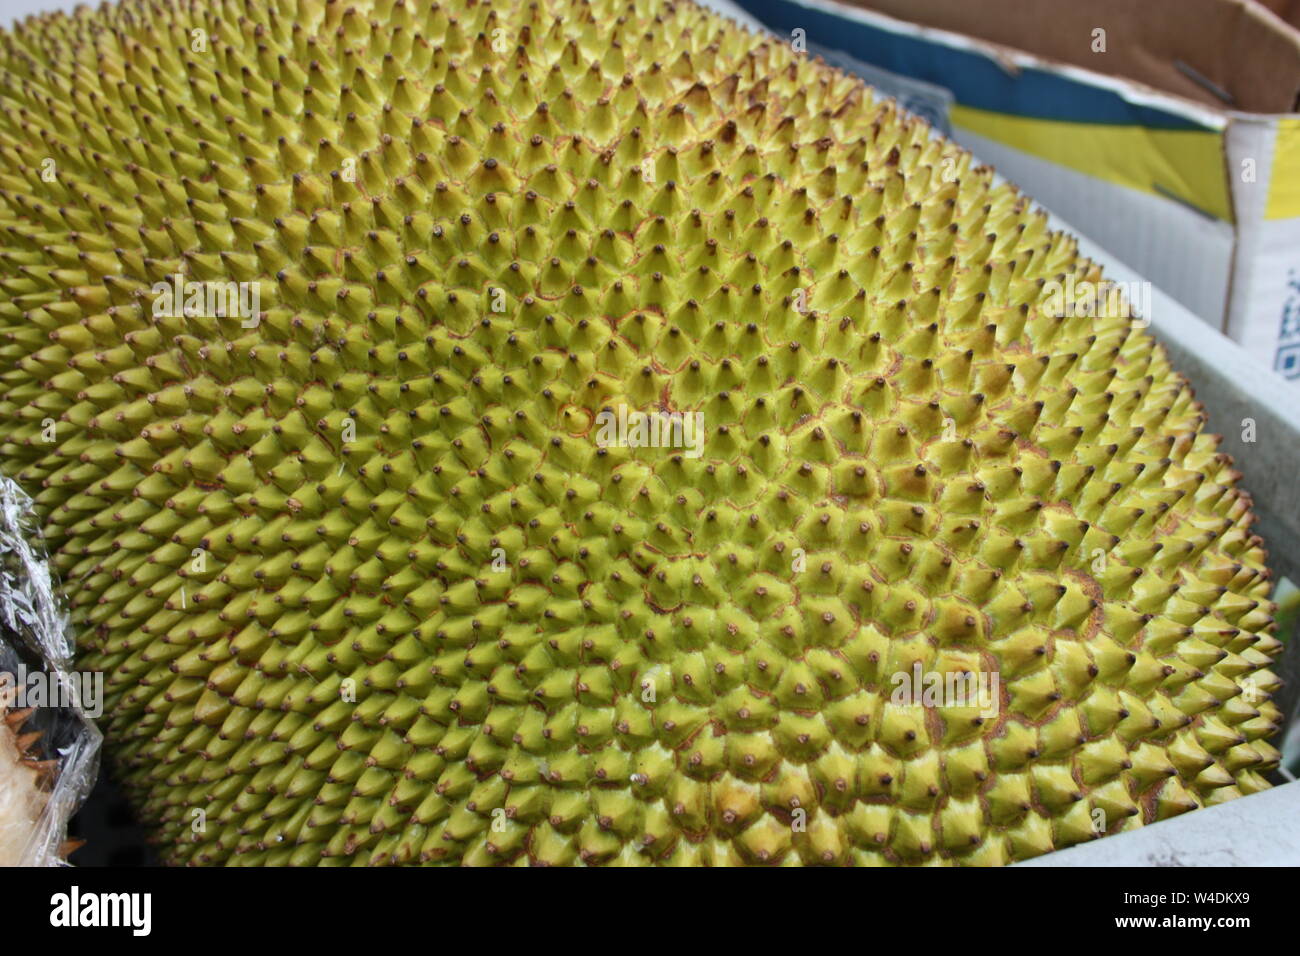 Durian, or durione or jackfruit. large exotic green and yellow fruit with  spikes, the most malodorous fruit. smelly food Stock Photo - Alamy